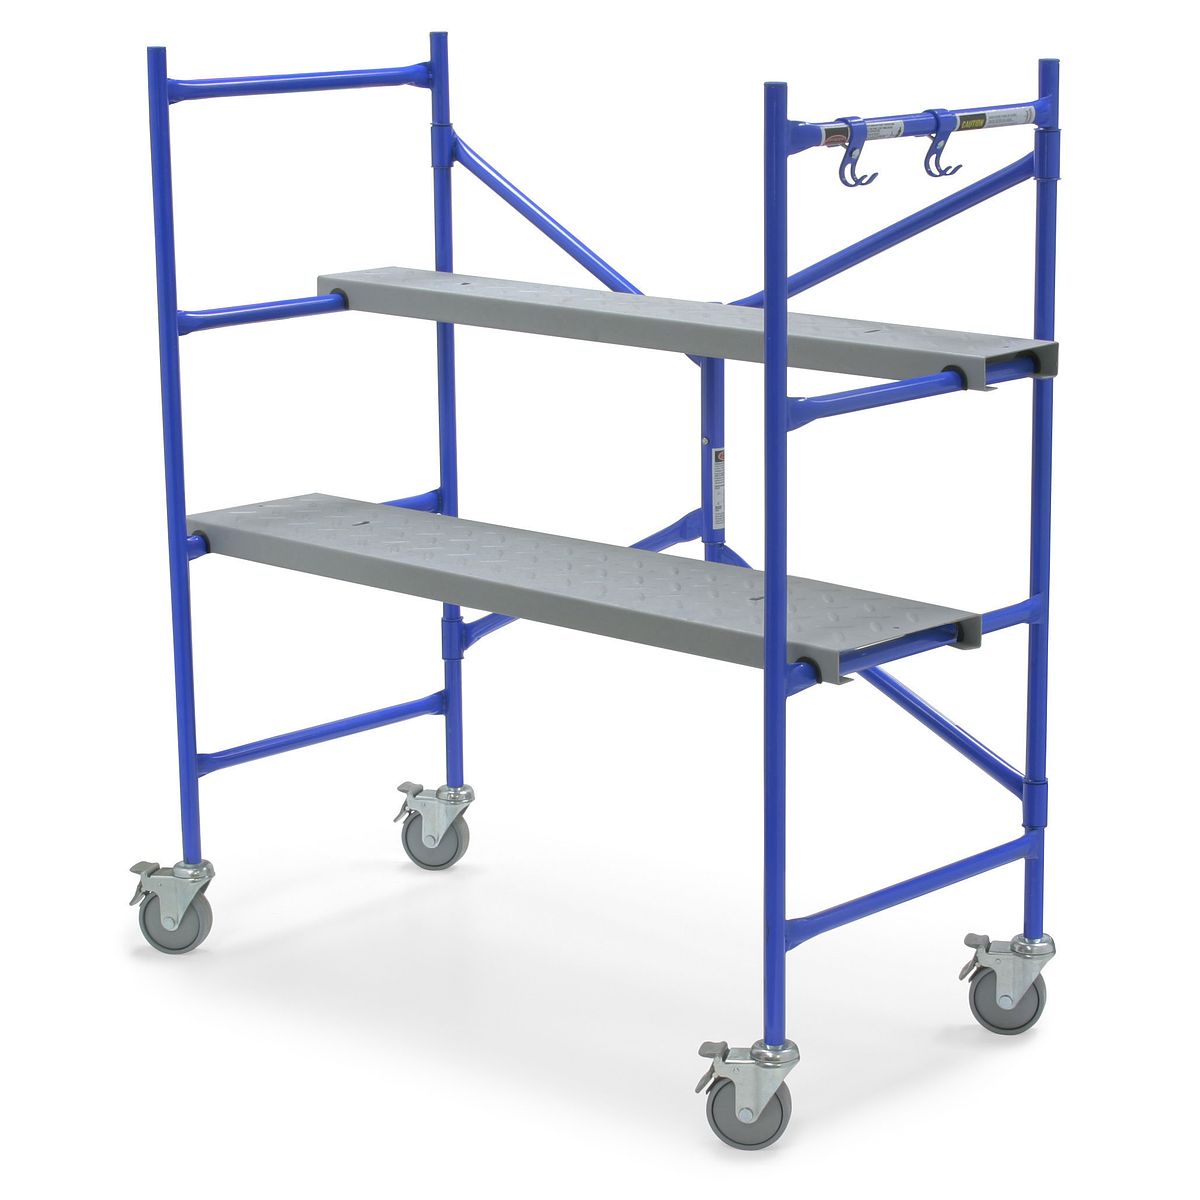 PS-48 Series | Rolling Scaffolds | Werner US